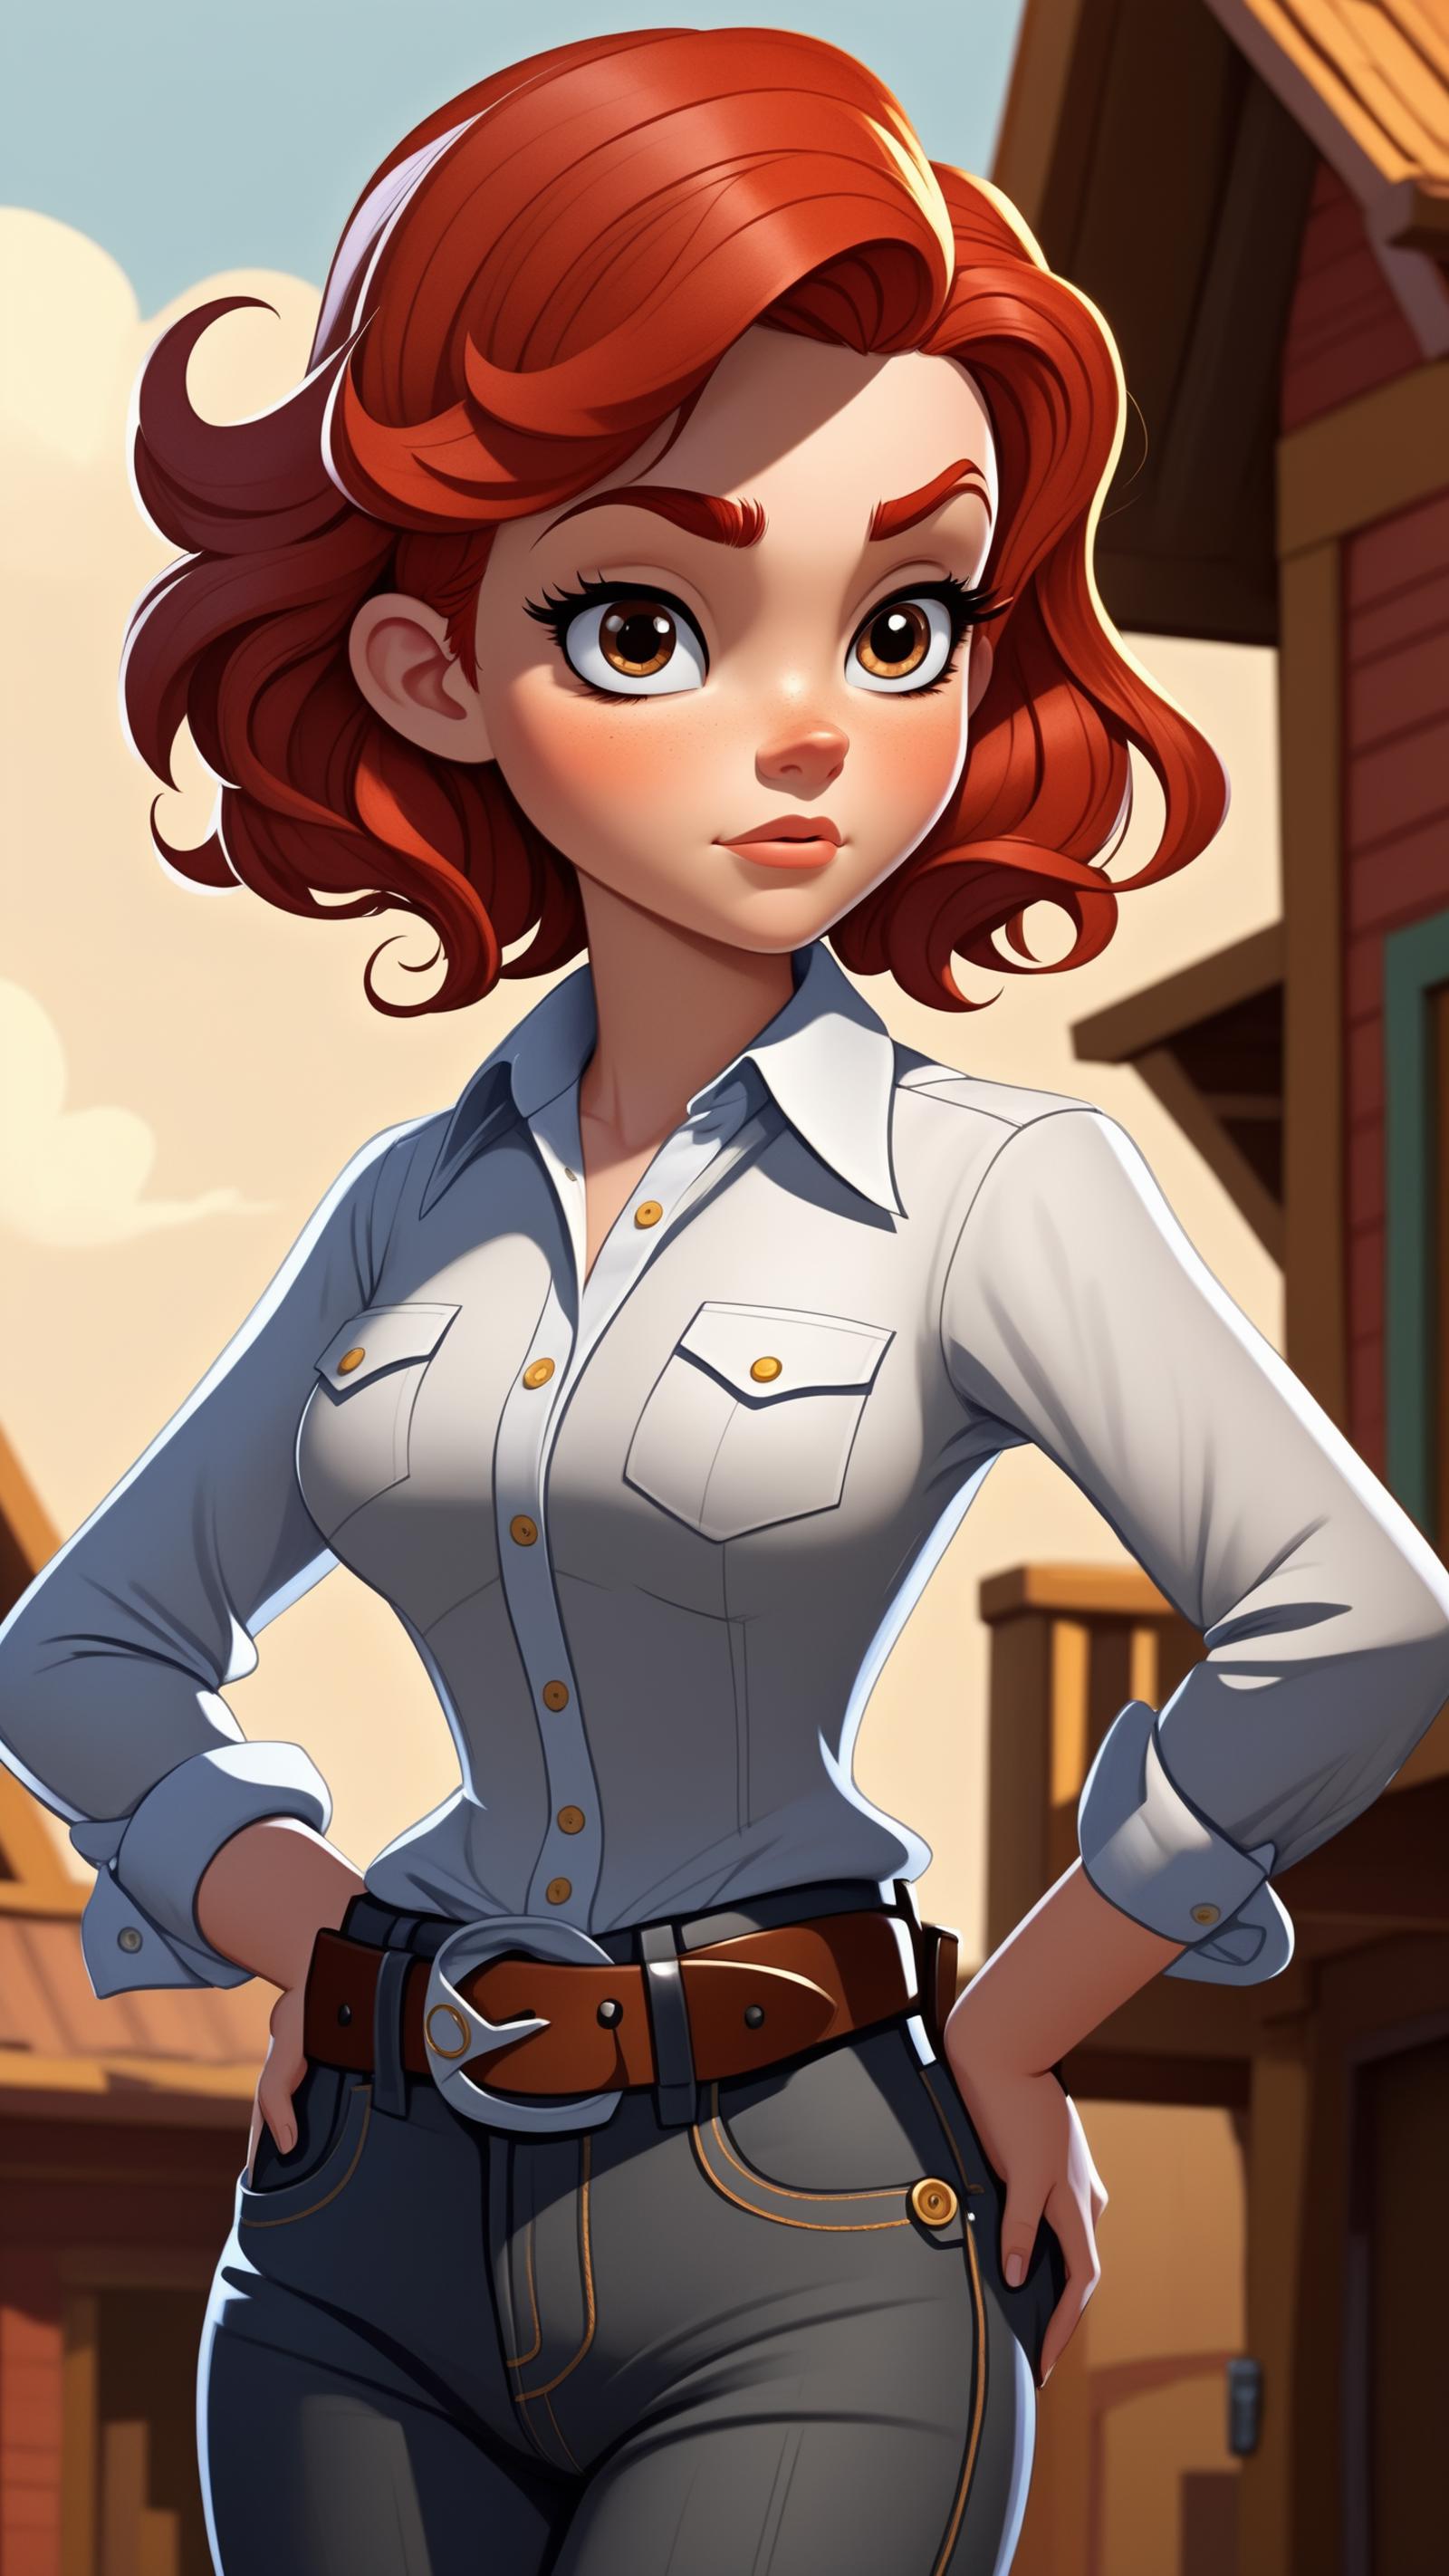 Cartoon Illustration of a Woman in a Cowgirl Outfit with Red Hair and a Blue Shirt.